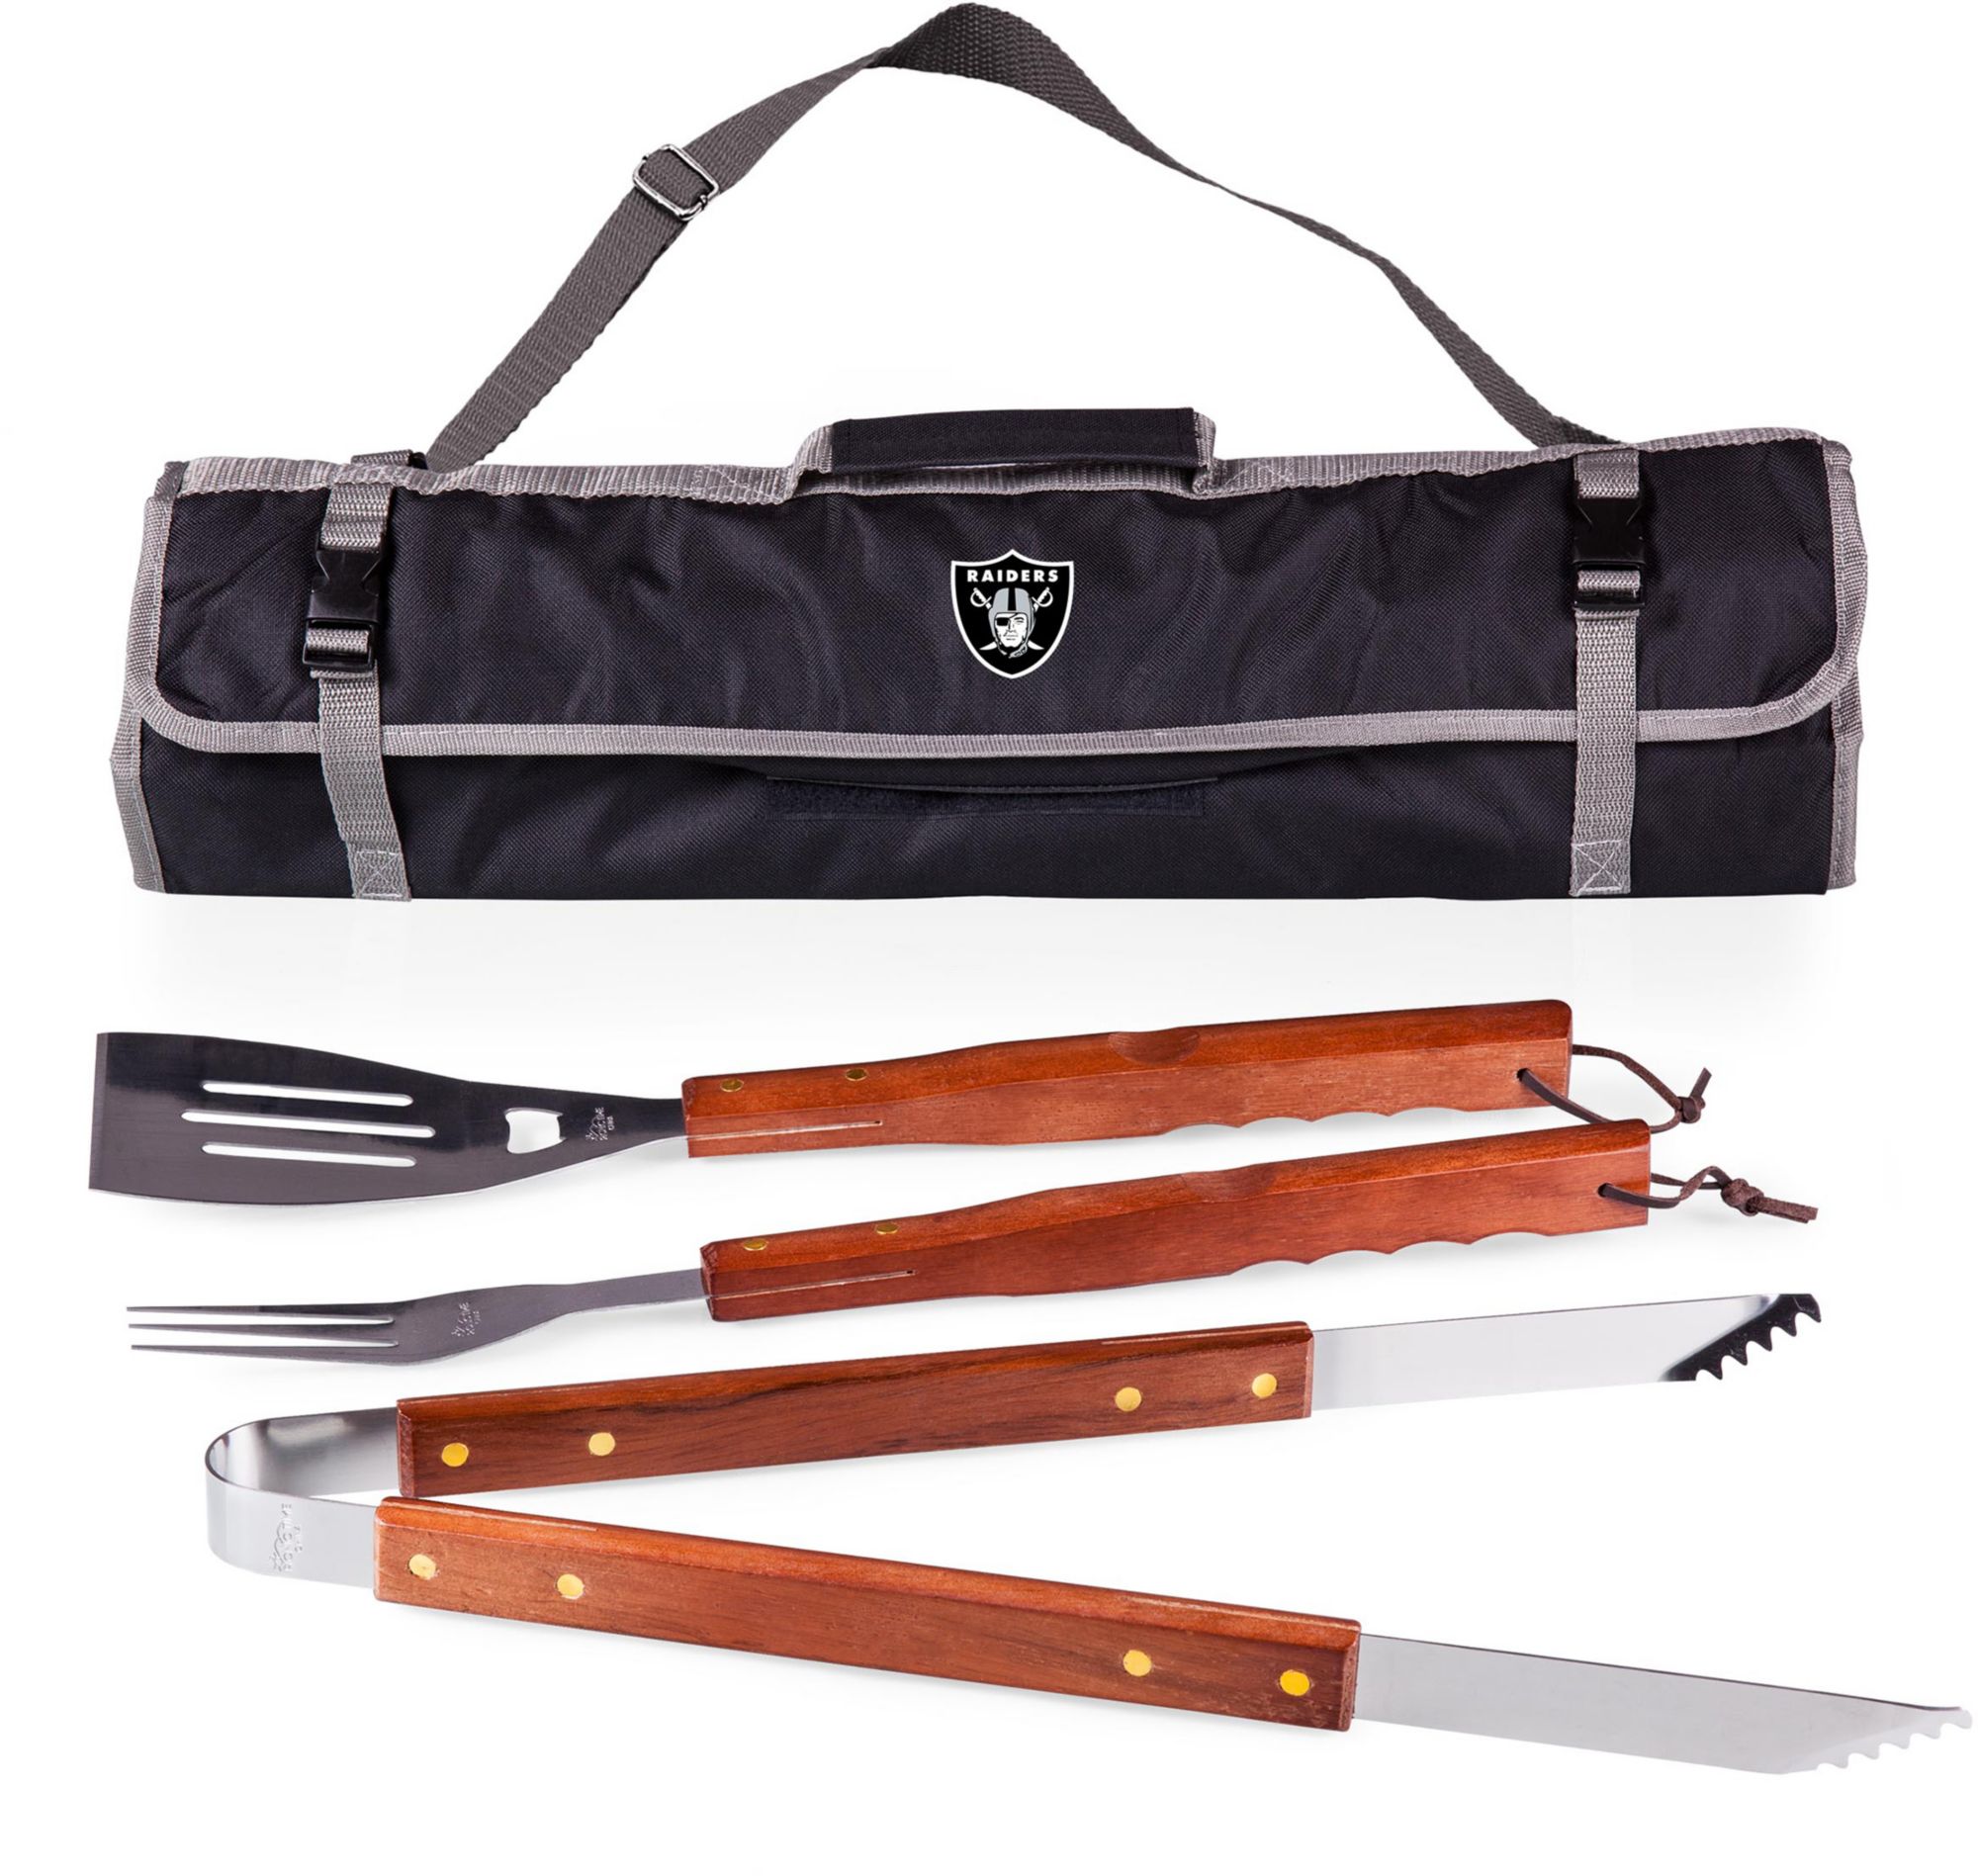 Officially Licensed NFL Team 8-Piece Tailgater BBQ Set - Raiders